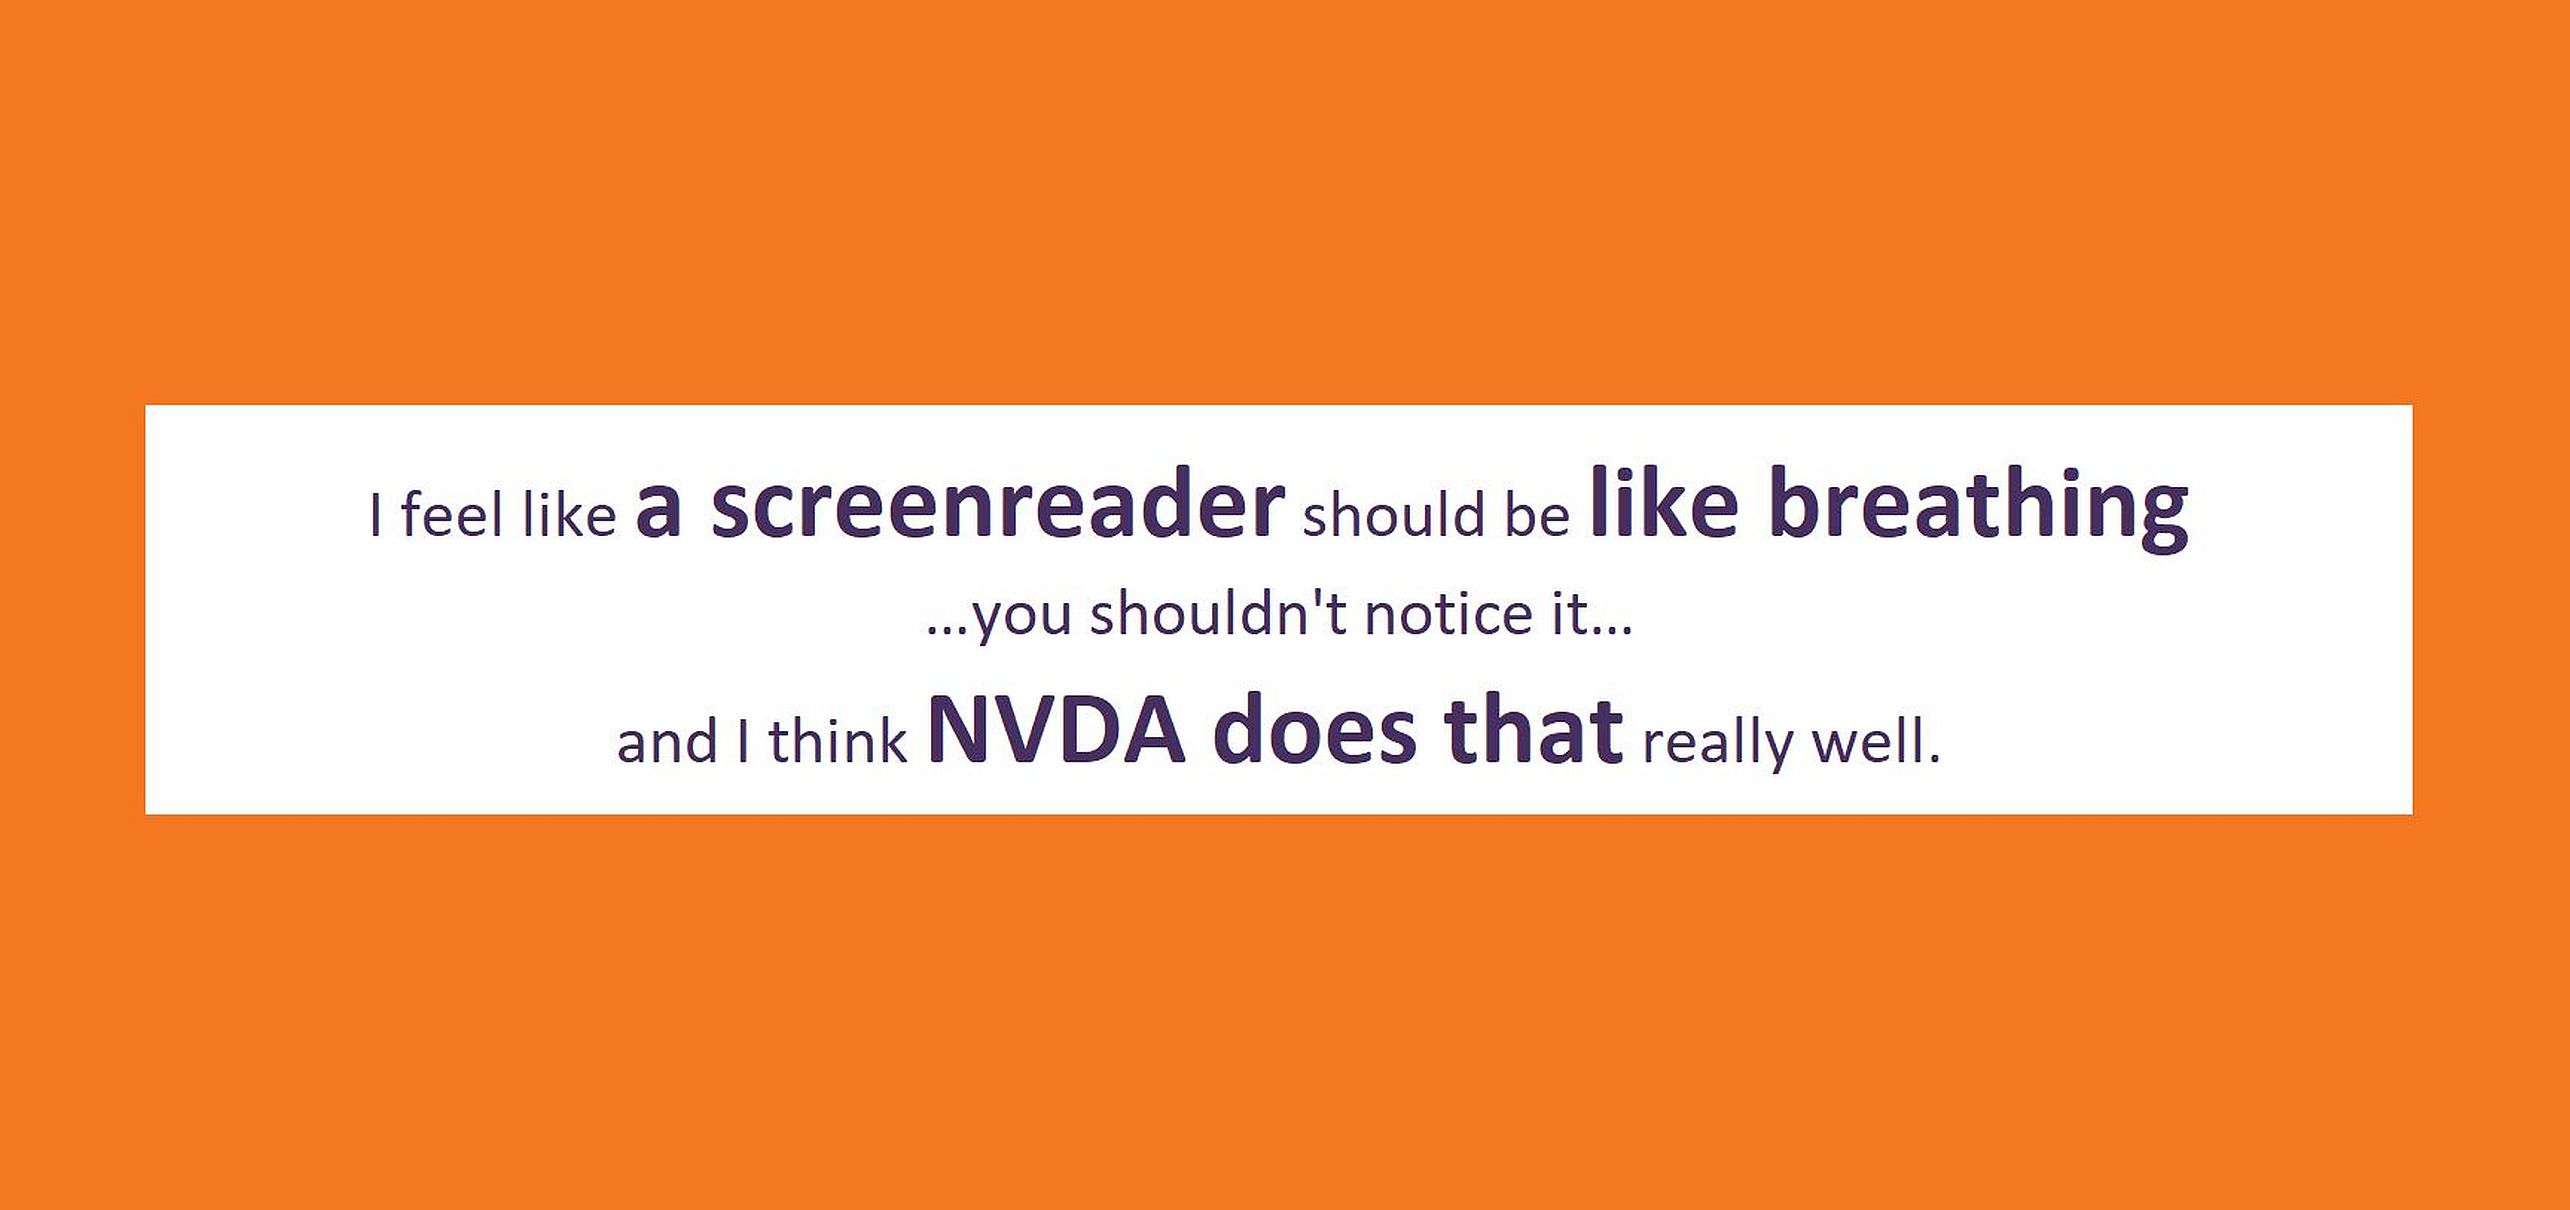 Text: "I feel that a screenreader should be like breathing.  You shouldn't notice it.  and I think NVDA does that really well." in purple on white with an orange border.